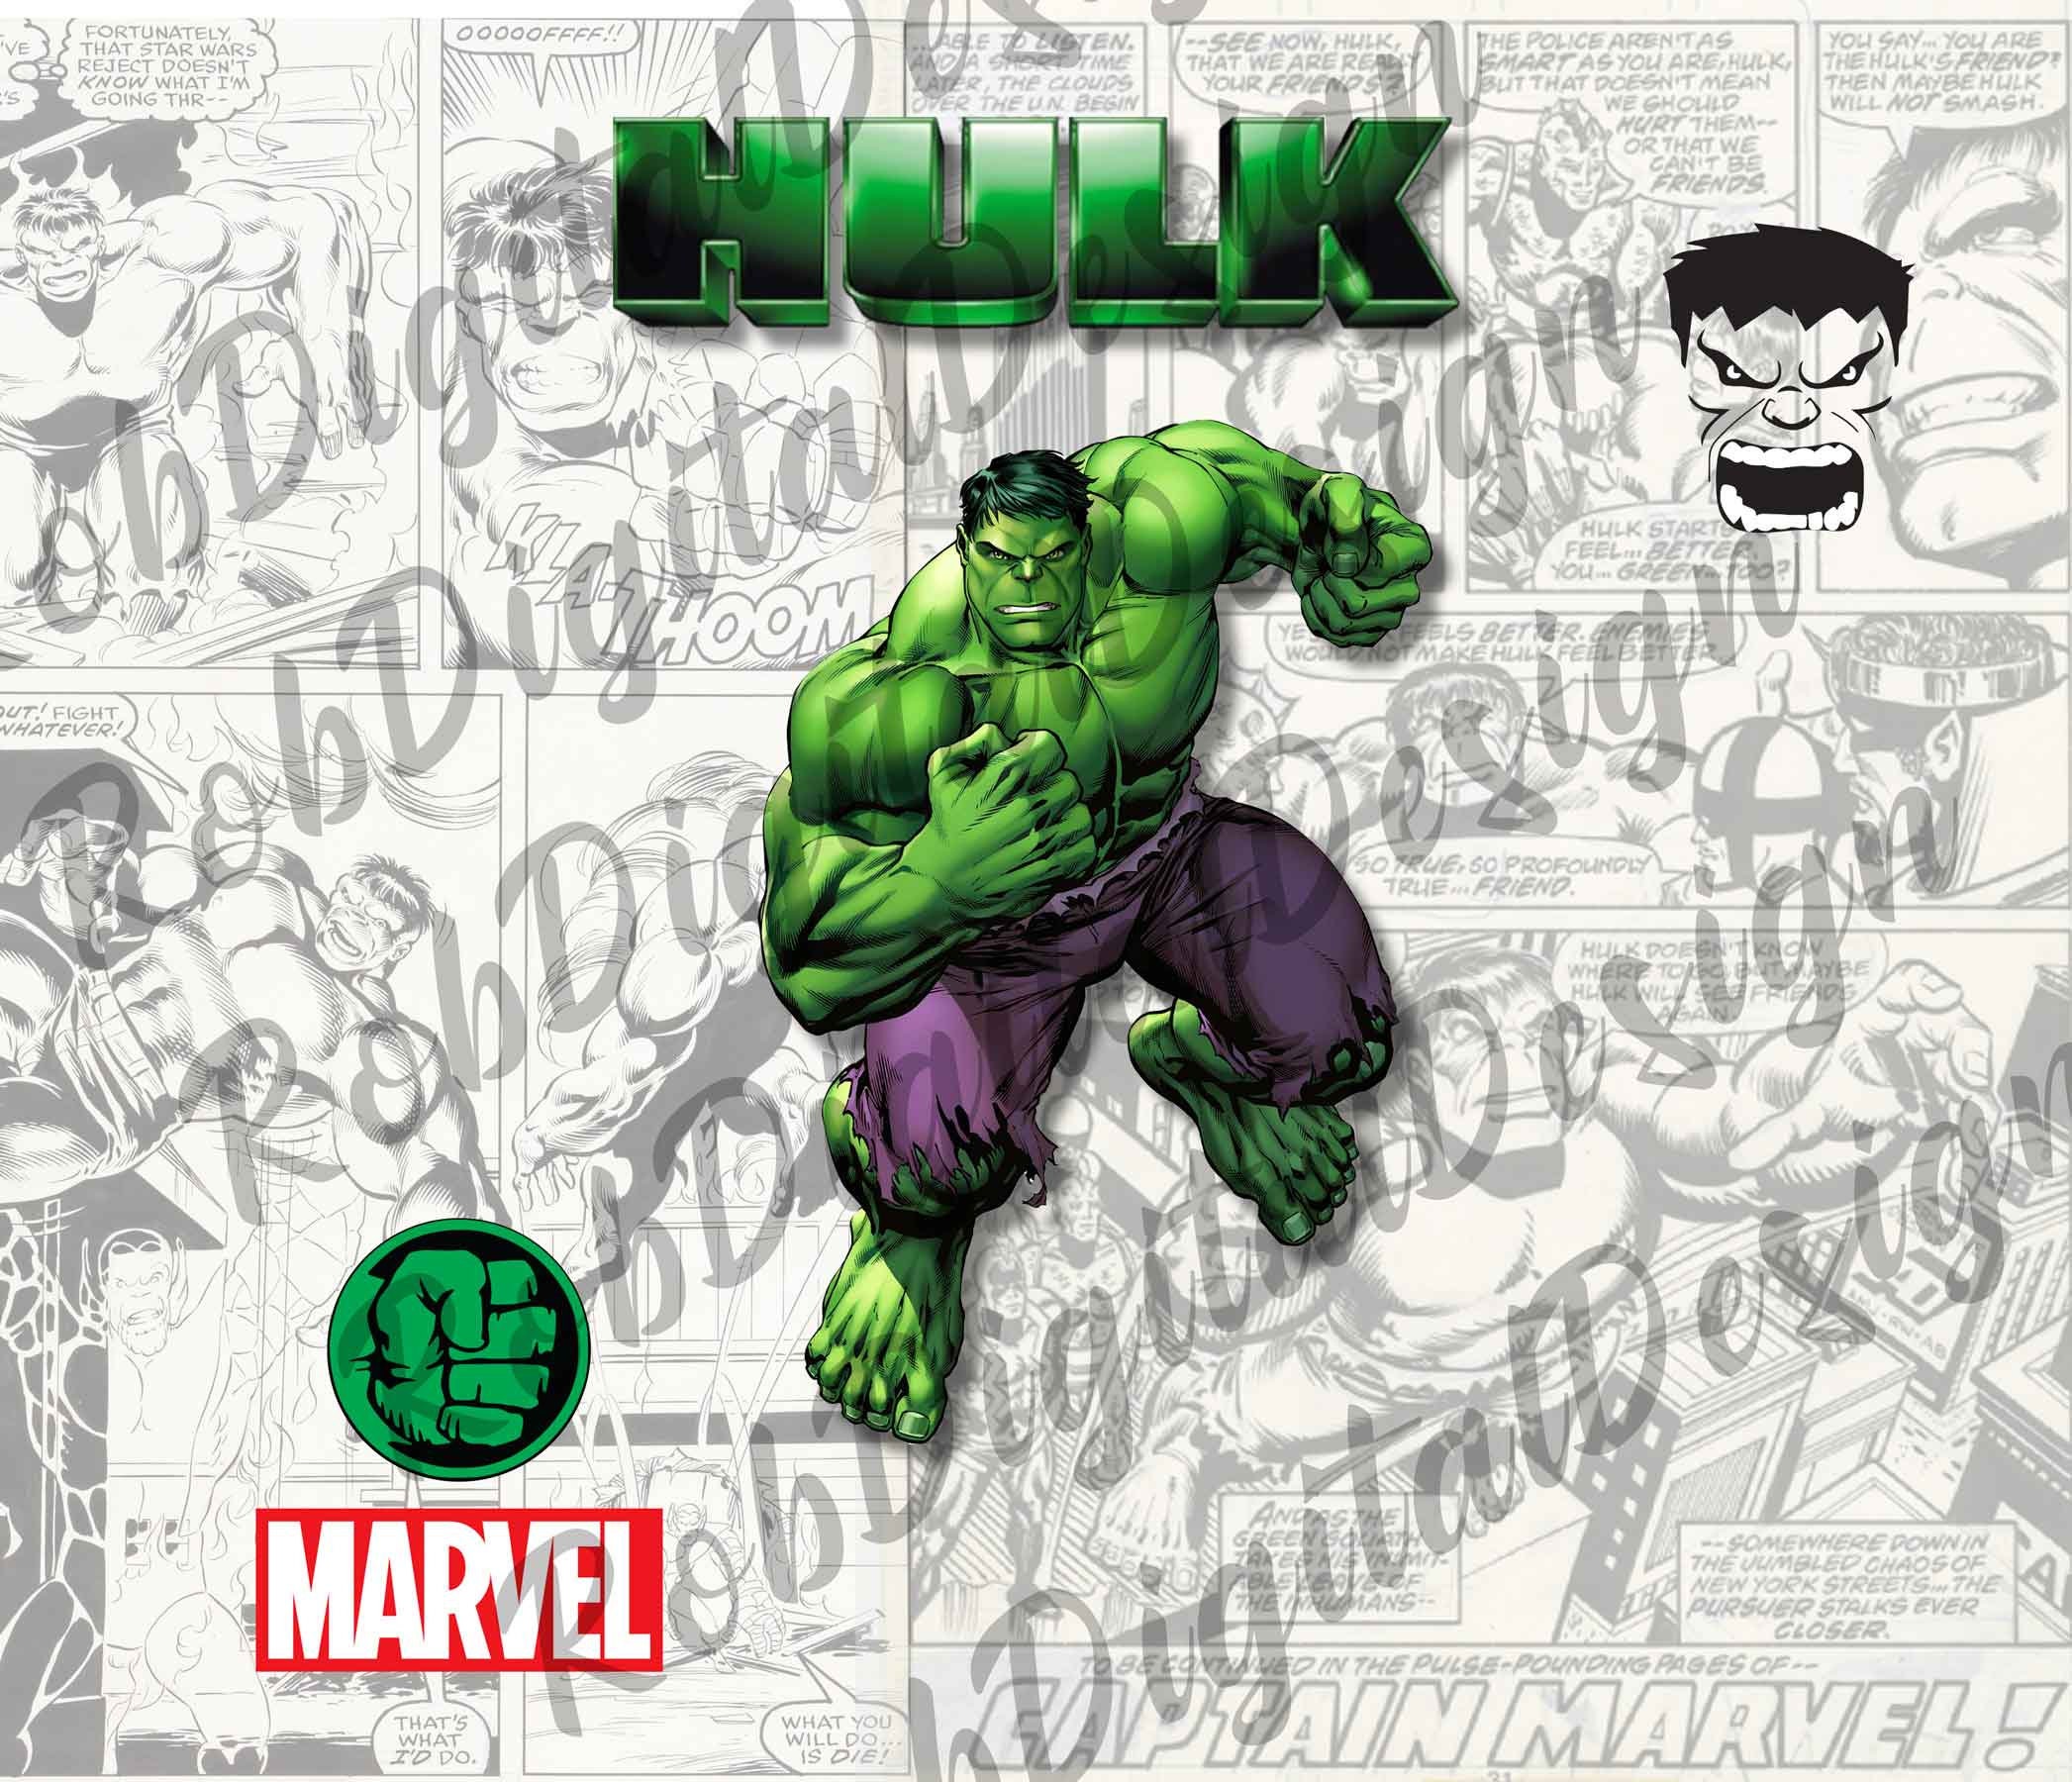 24pcs The Hulk Water Bottle Labels The Hulk Water Bottle Wrappers